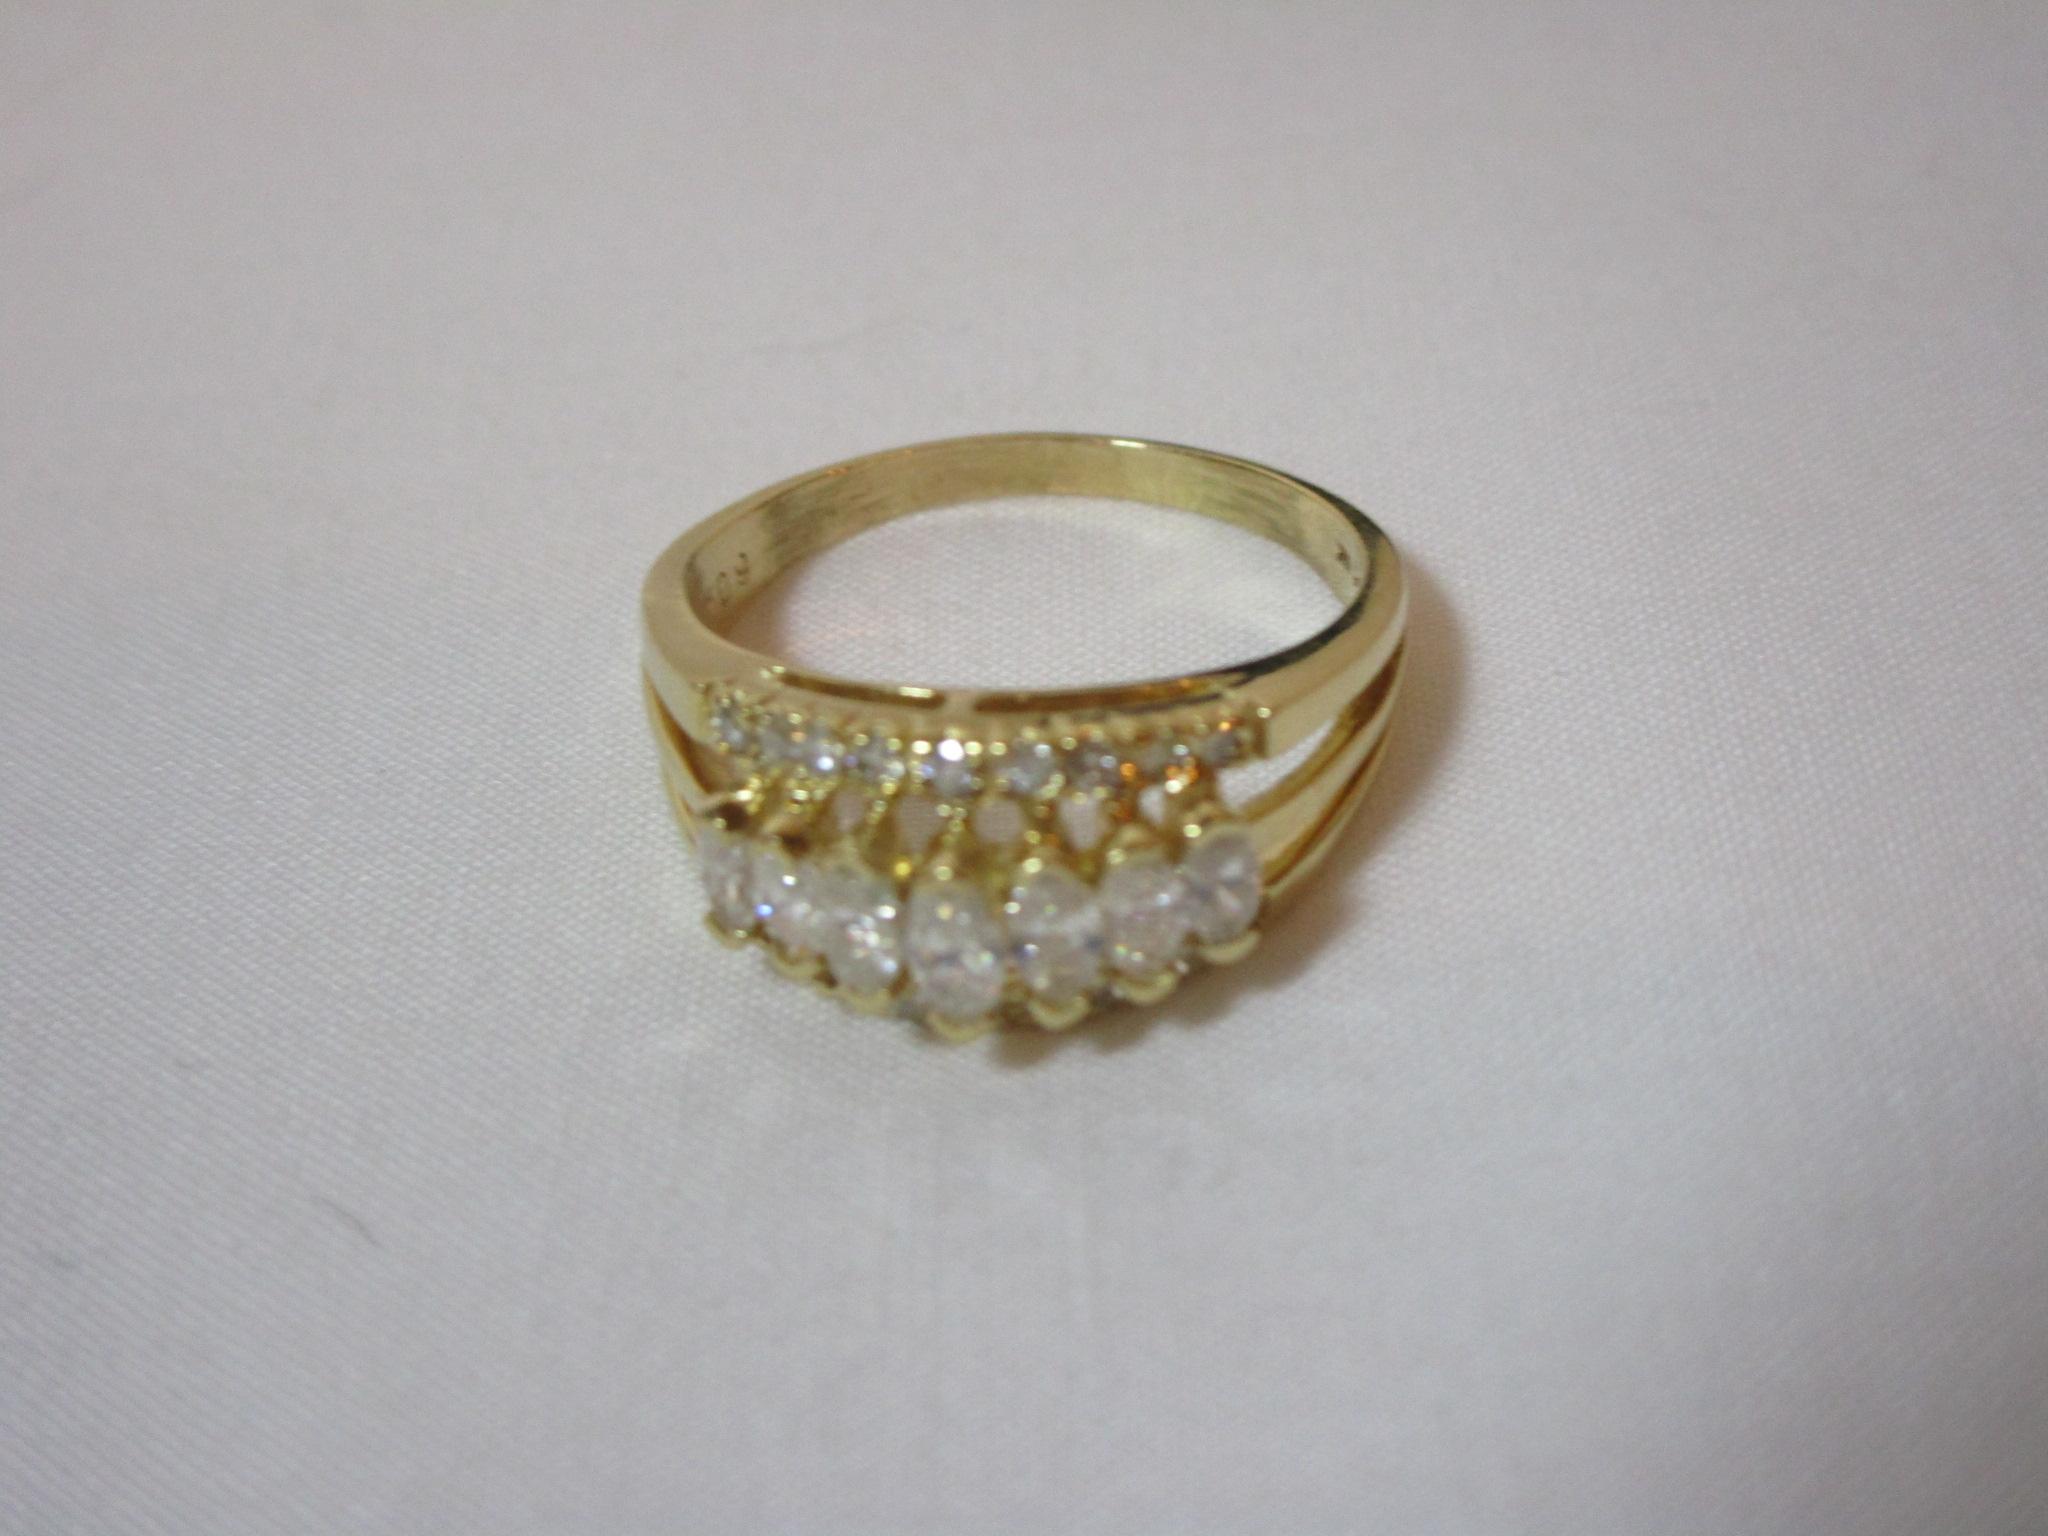 7 Marquise Diamonds Mounted in The Center of a 14k Yellow Gold Band